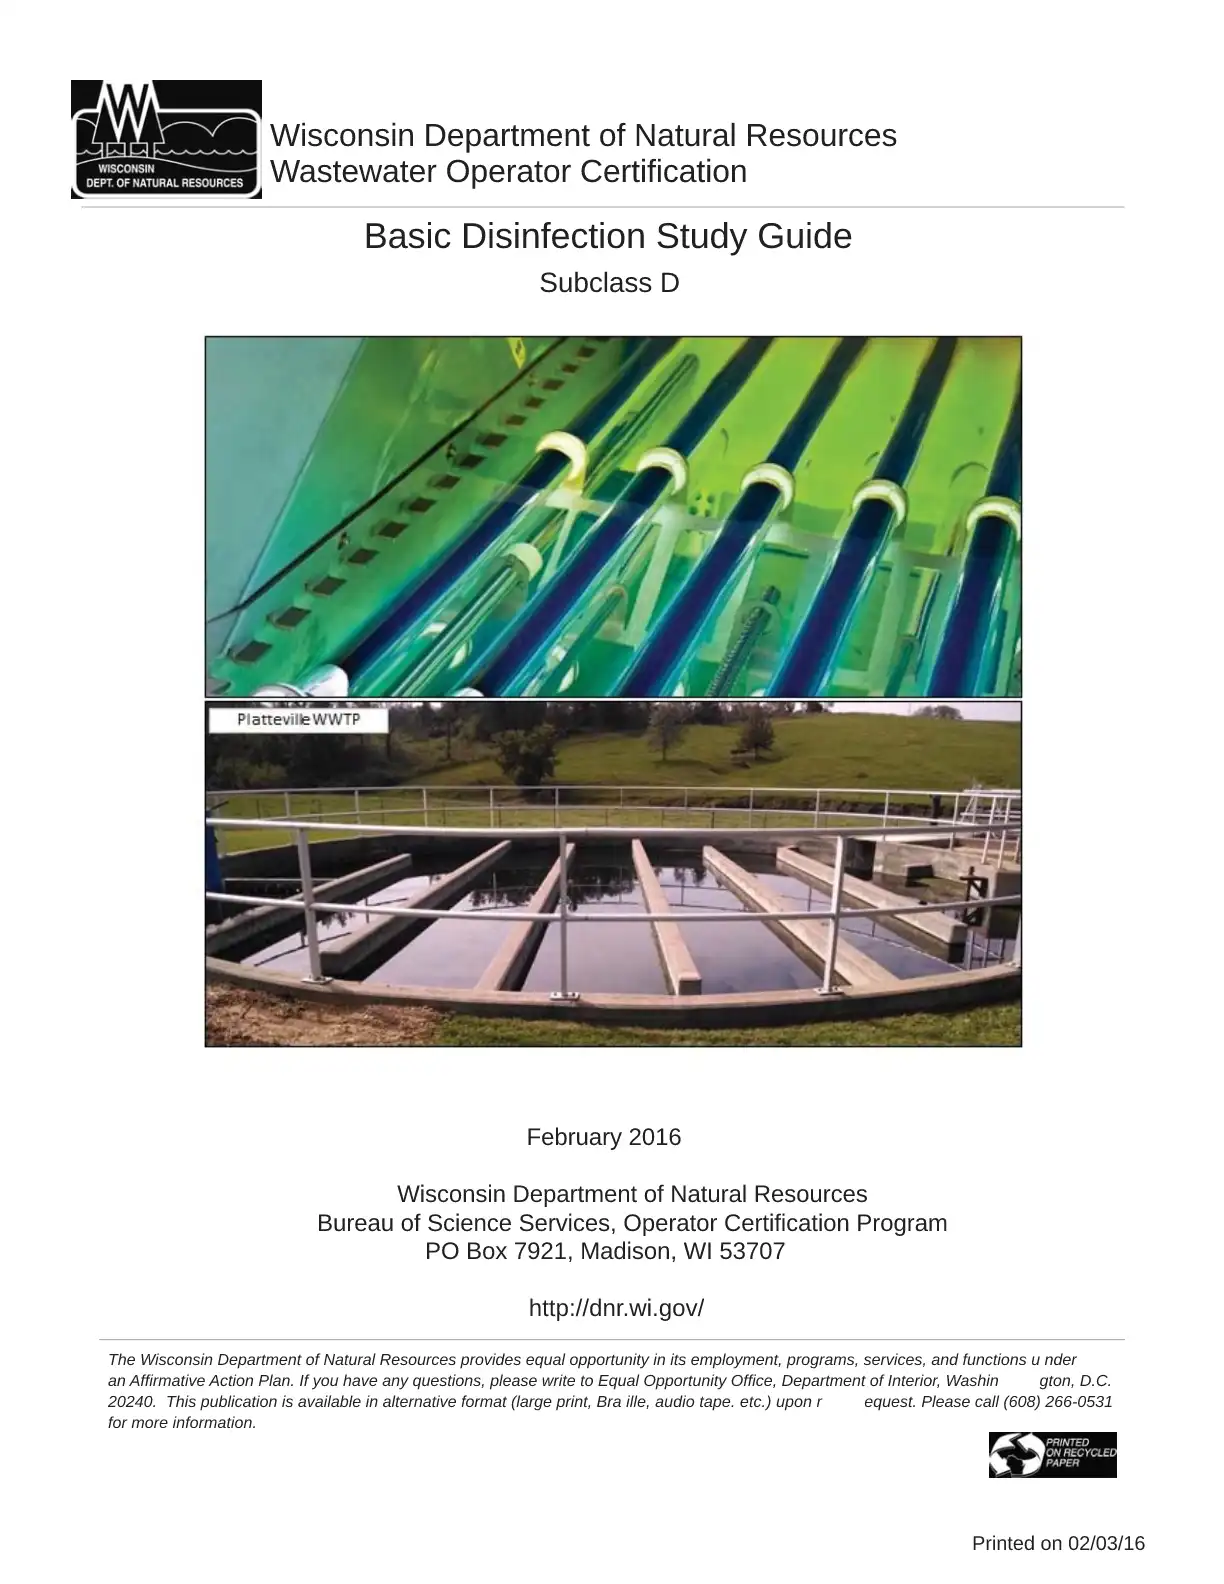 Basic Disinfection Study Guide